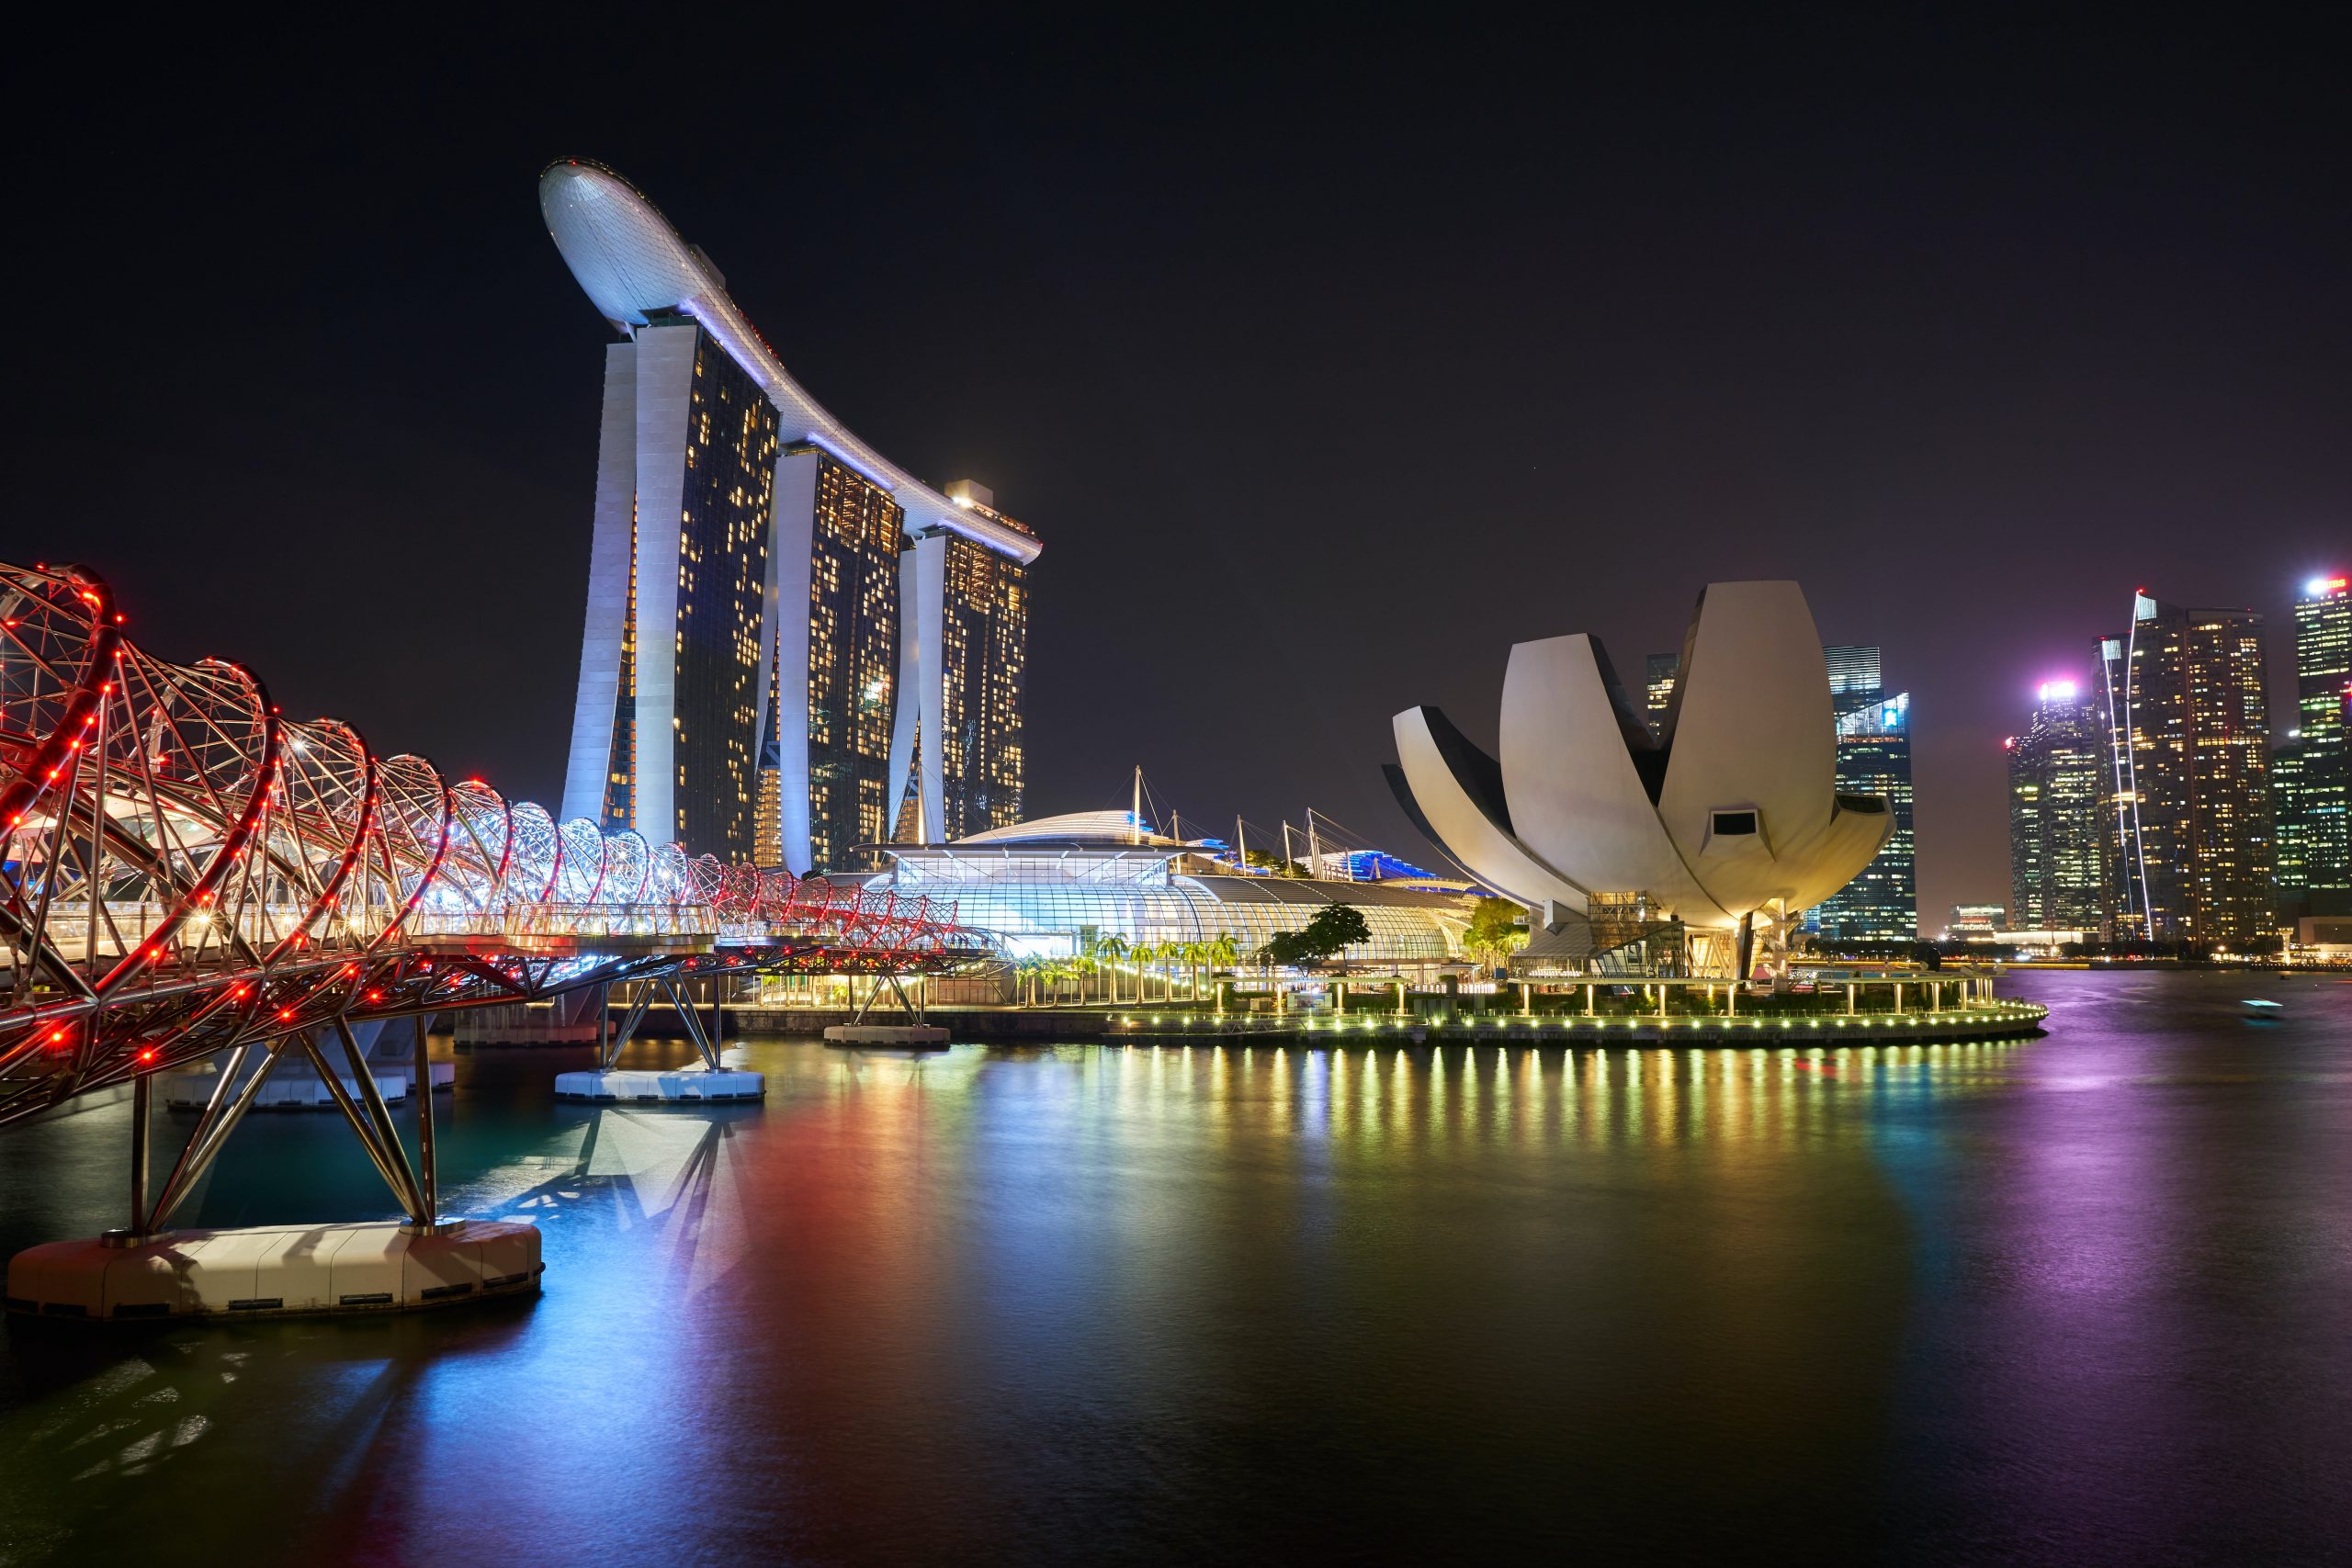 What is important to see in Singapore?